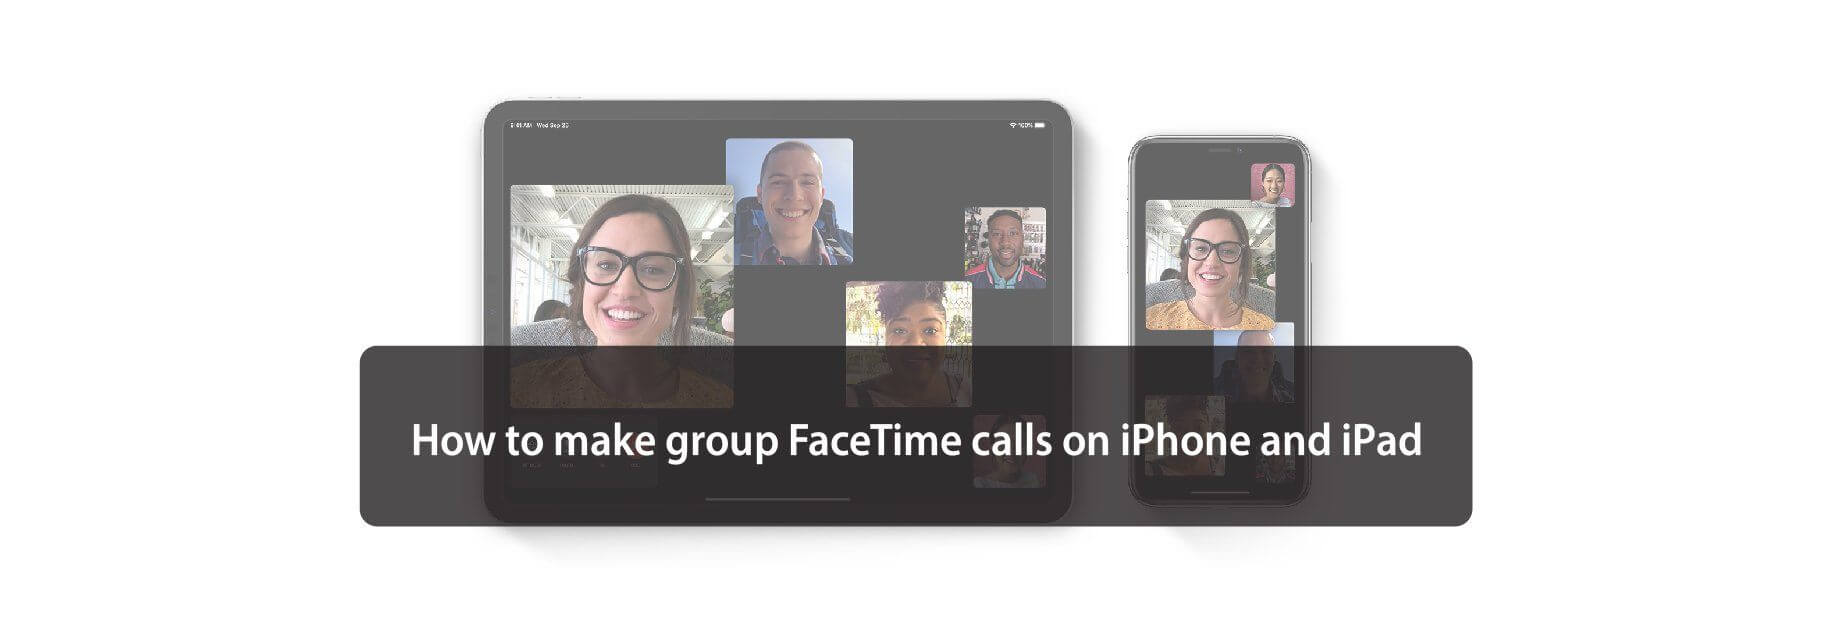 How to make group FaceTime calls on Apple iPhone and iPad